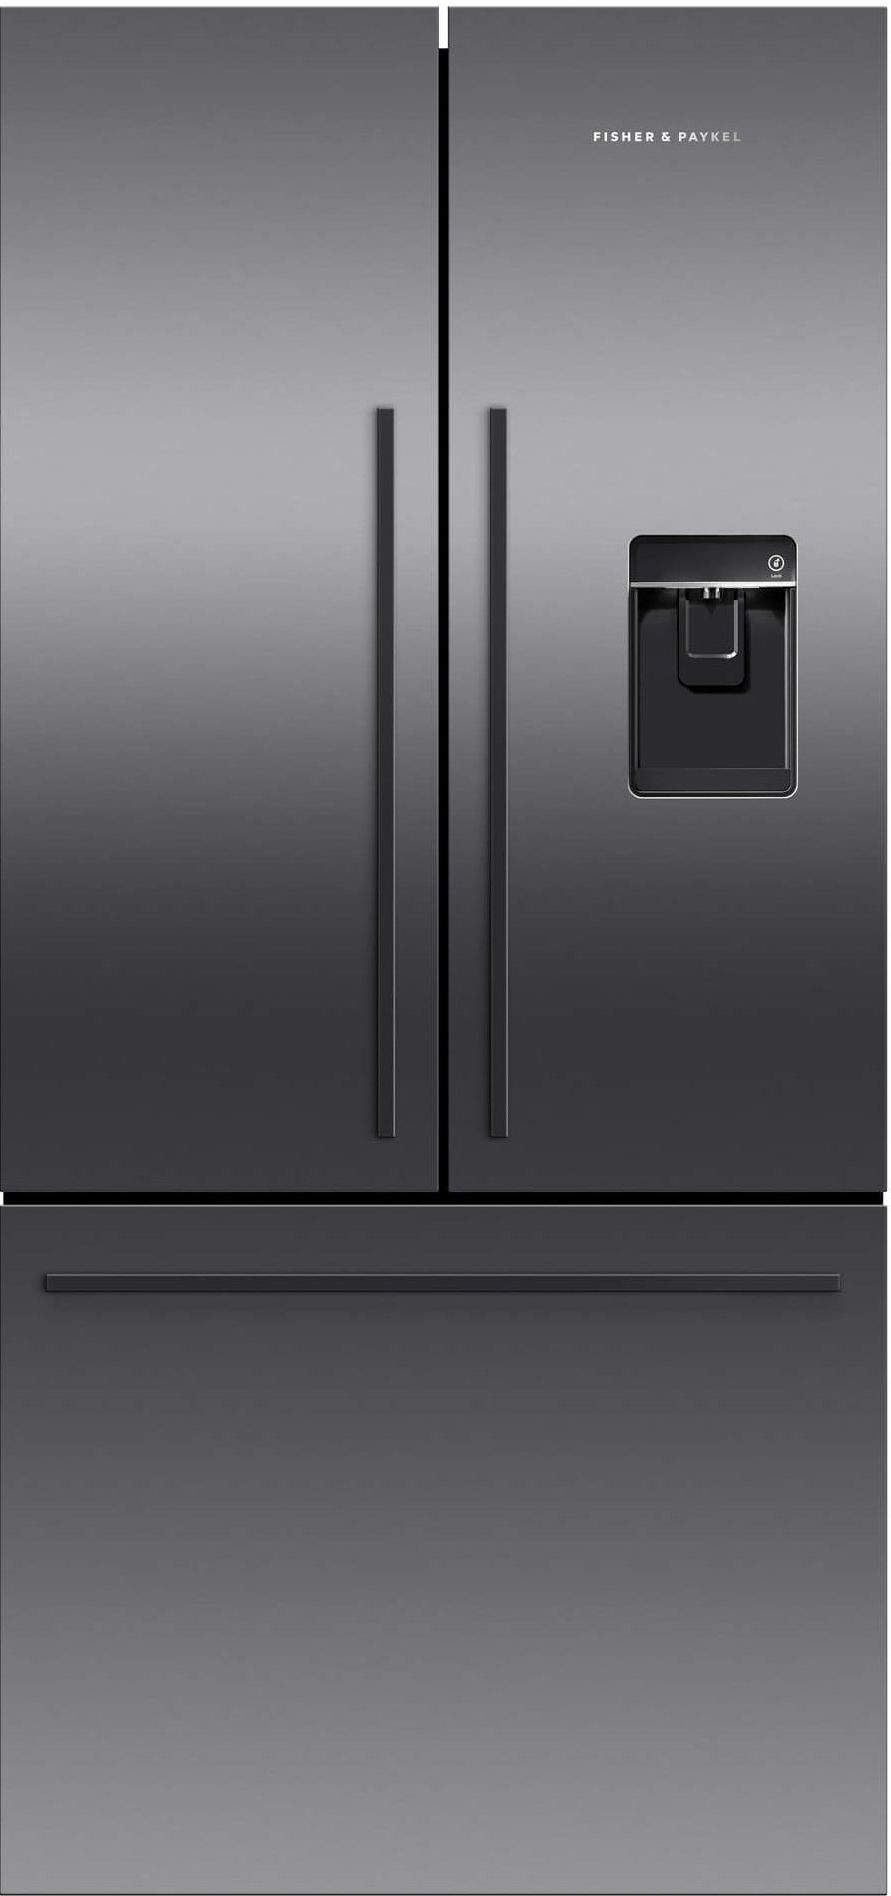 Fisher & Paykel 16.9 Cu. Ft. French Door Refrigerator-Black Stainless Steel-RF170ADUSB5